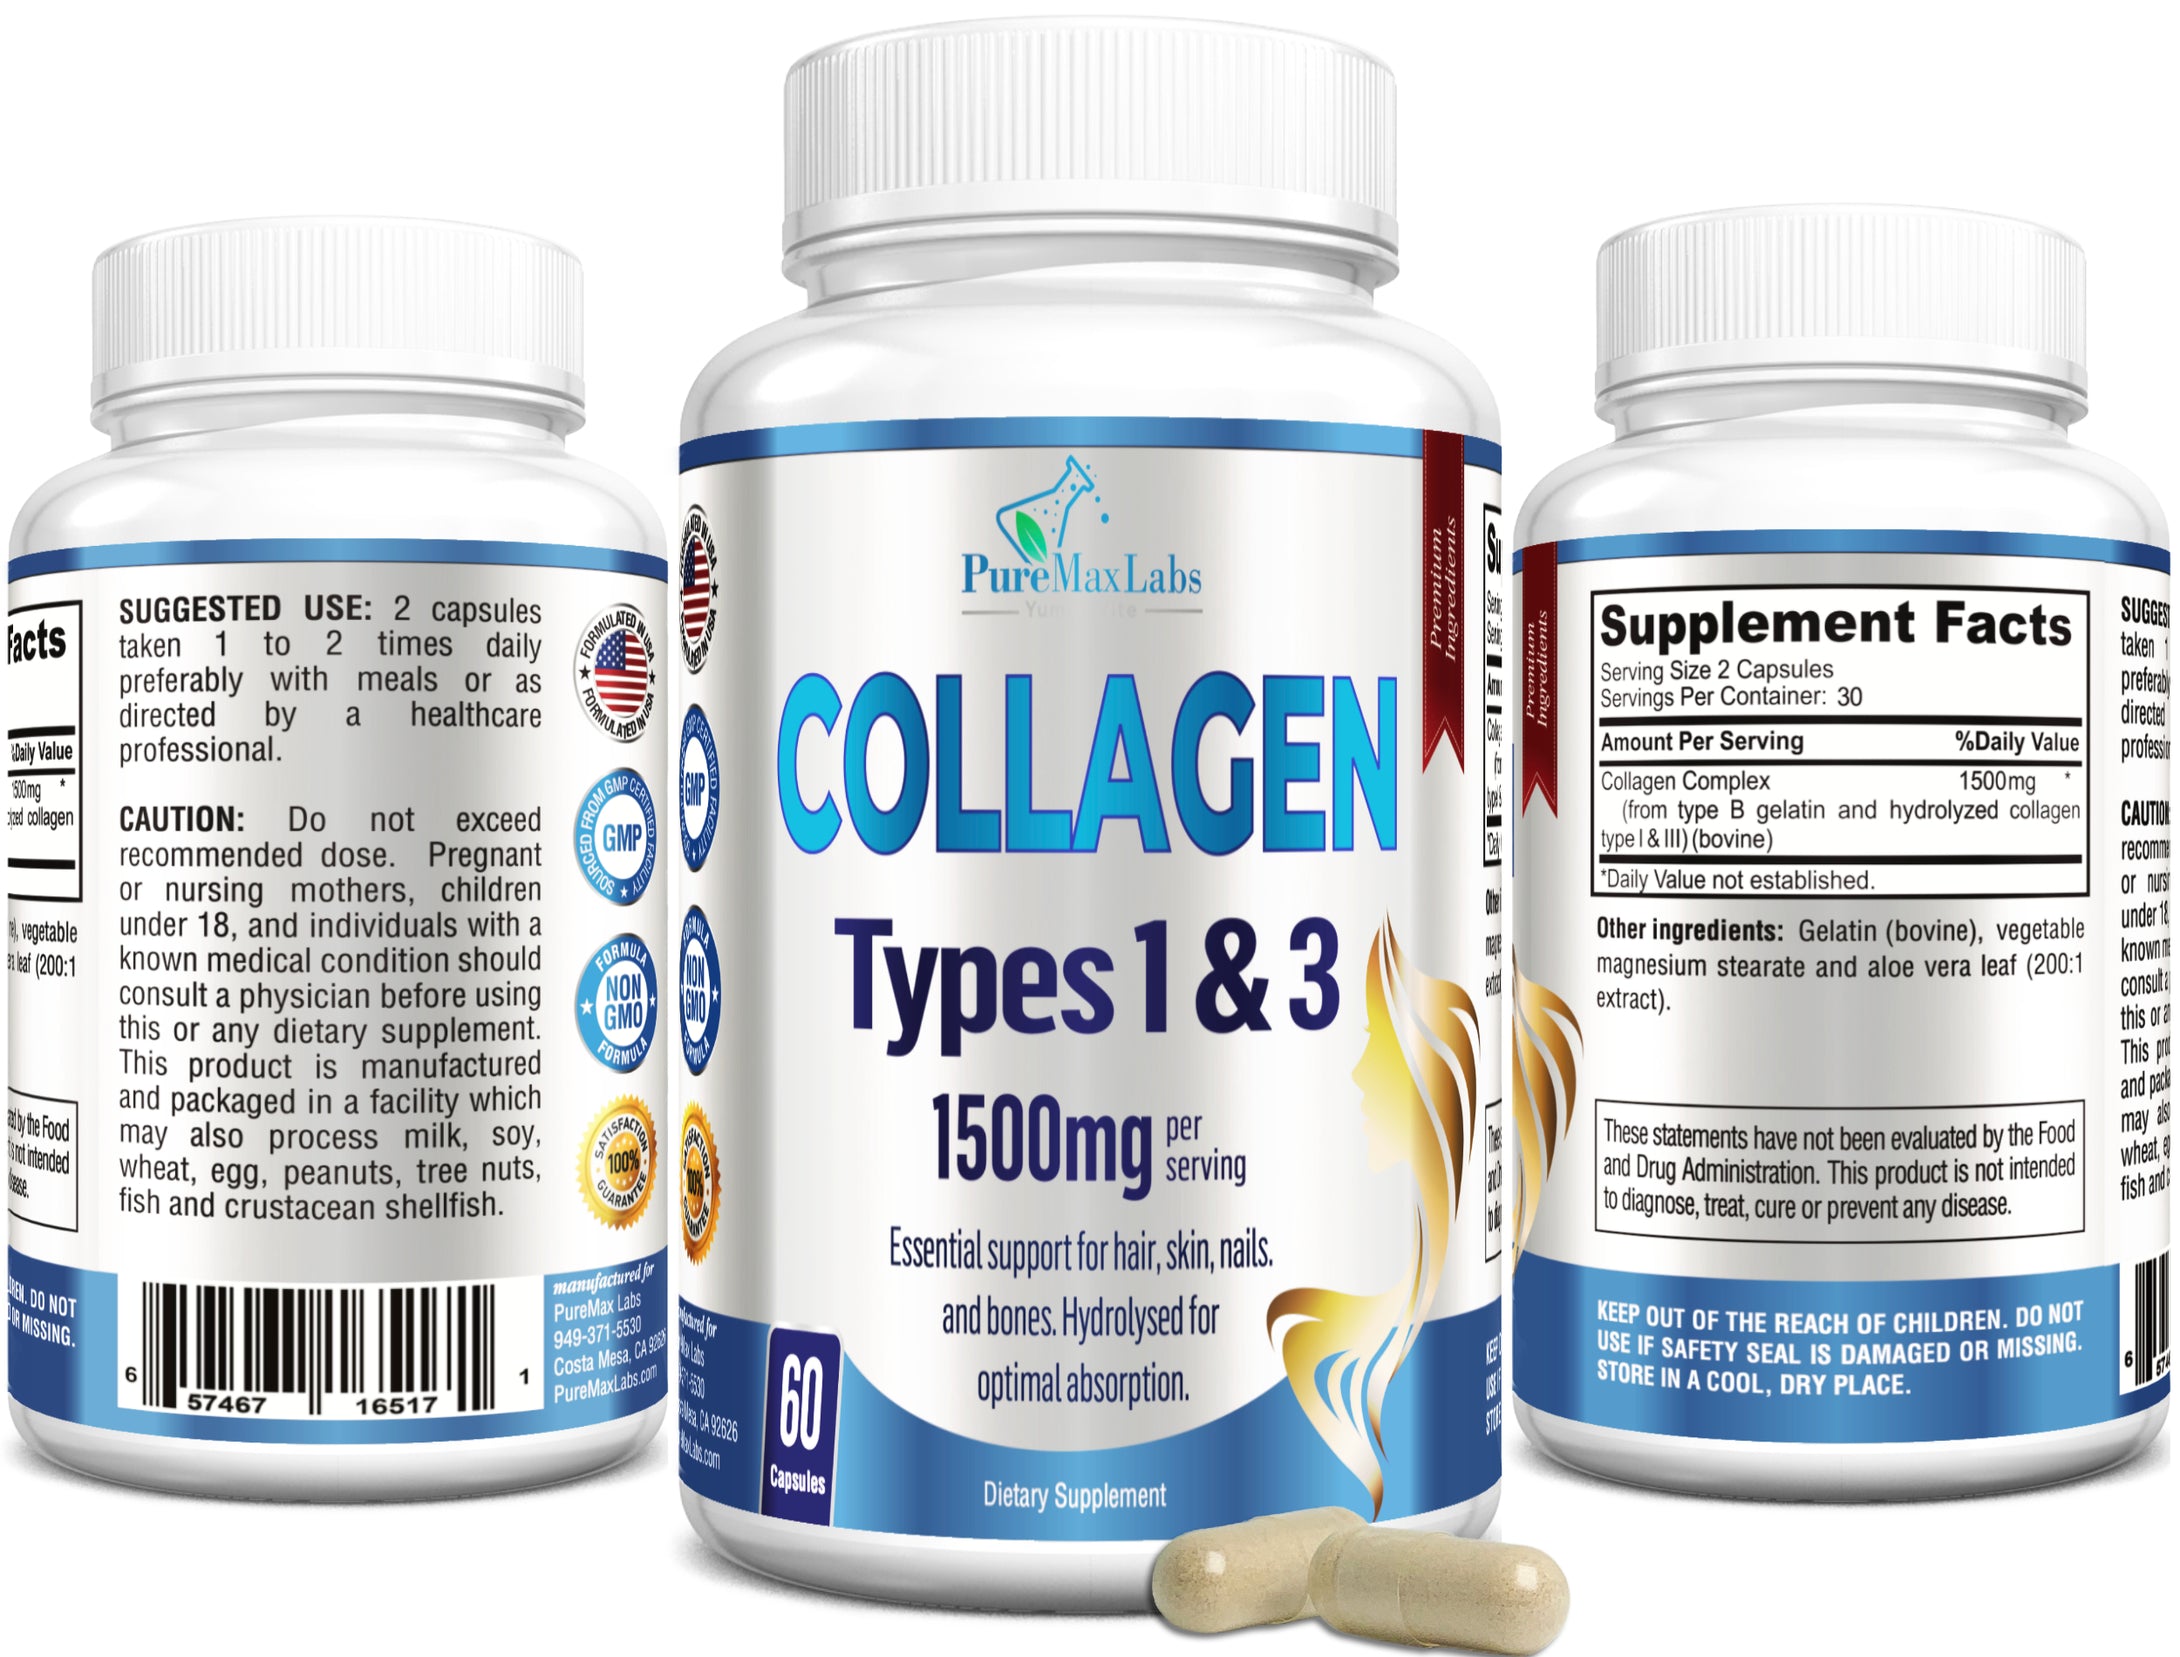 Collagen Types 1 & 3 1500mg - Hydrolyzed Collagen Supplement - 60 Capsules